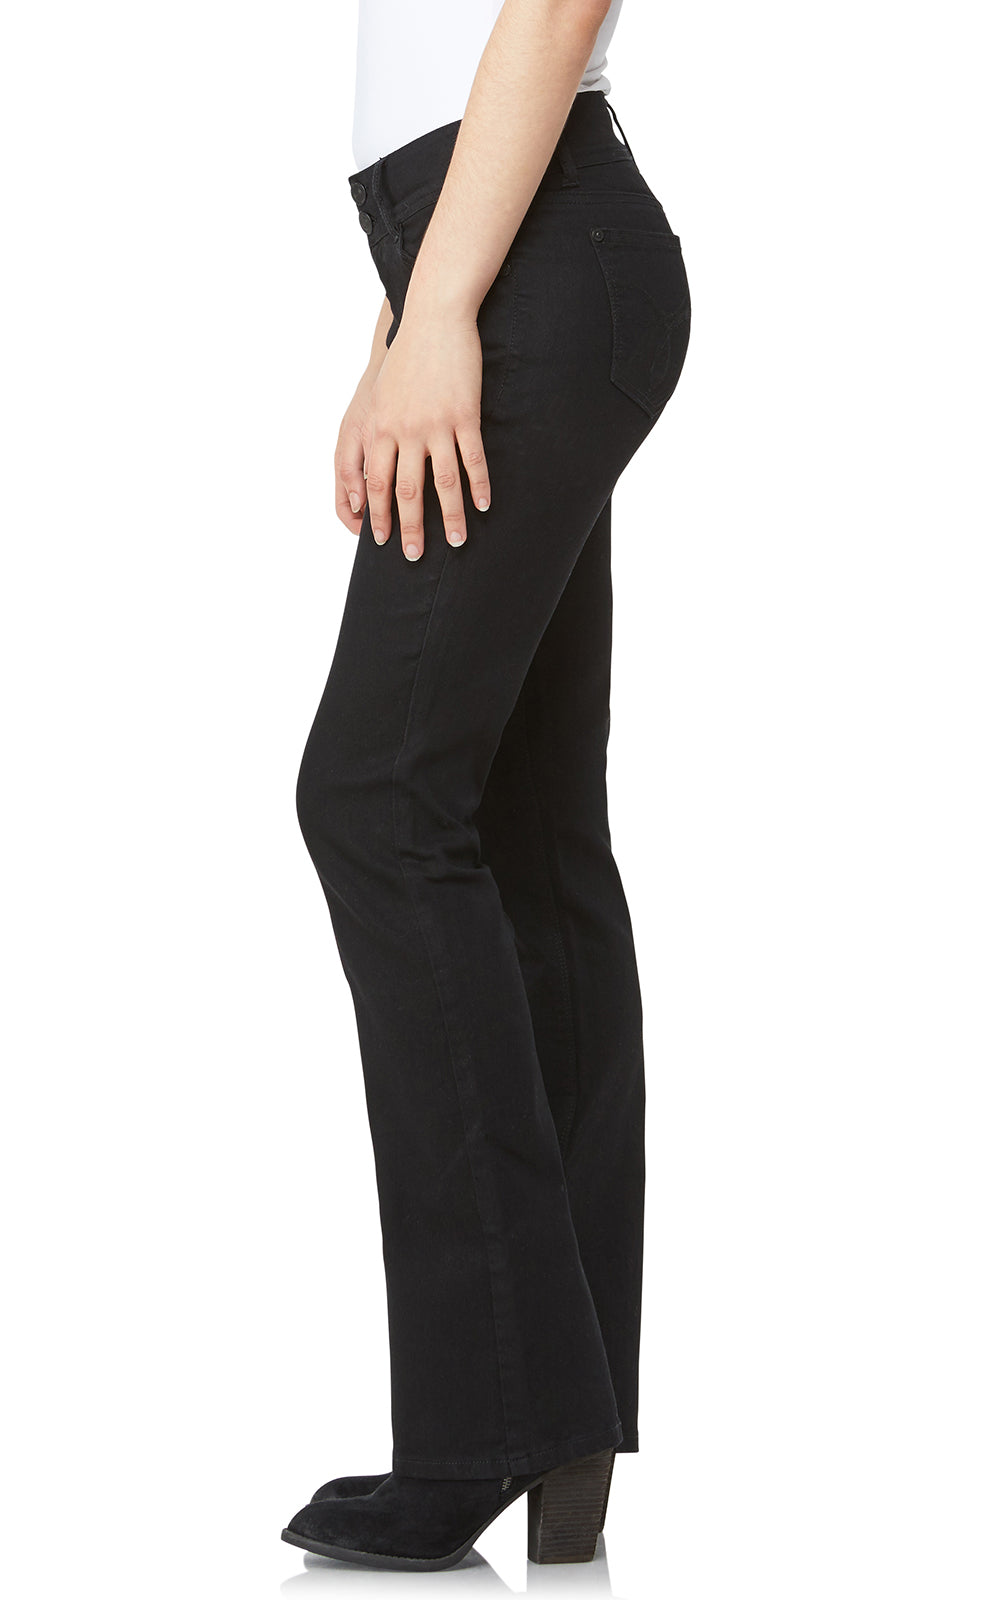 InstaStretch® Luscious Curvy Bootcut Jeans